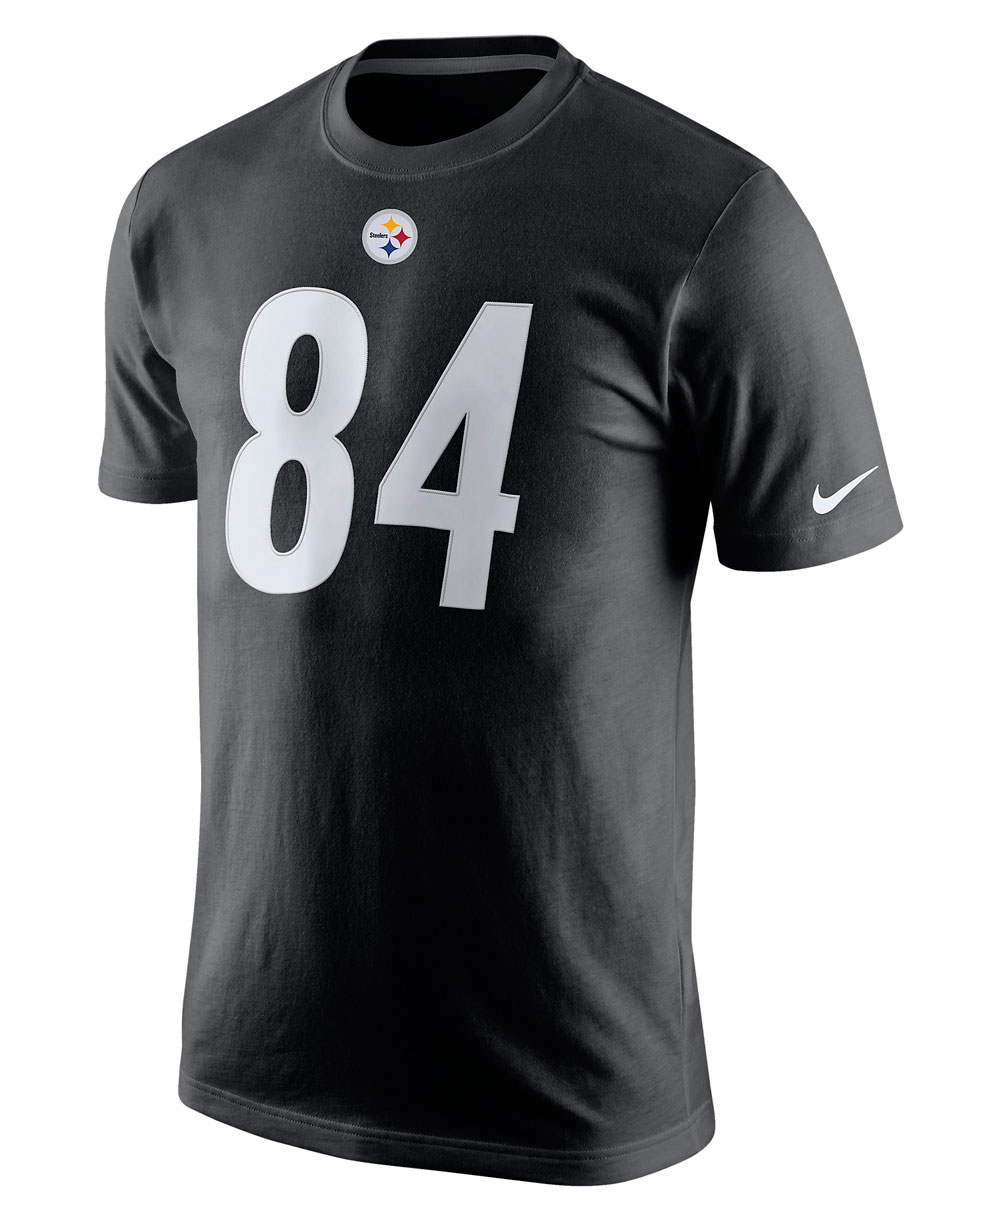 Player Pride Name and Number T-Shirt Homme NFL Steelers / Antonio Brown